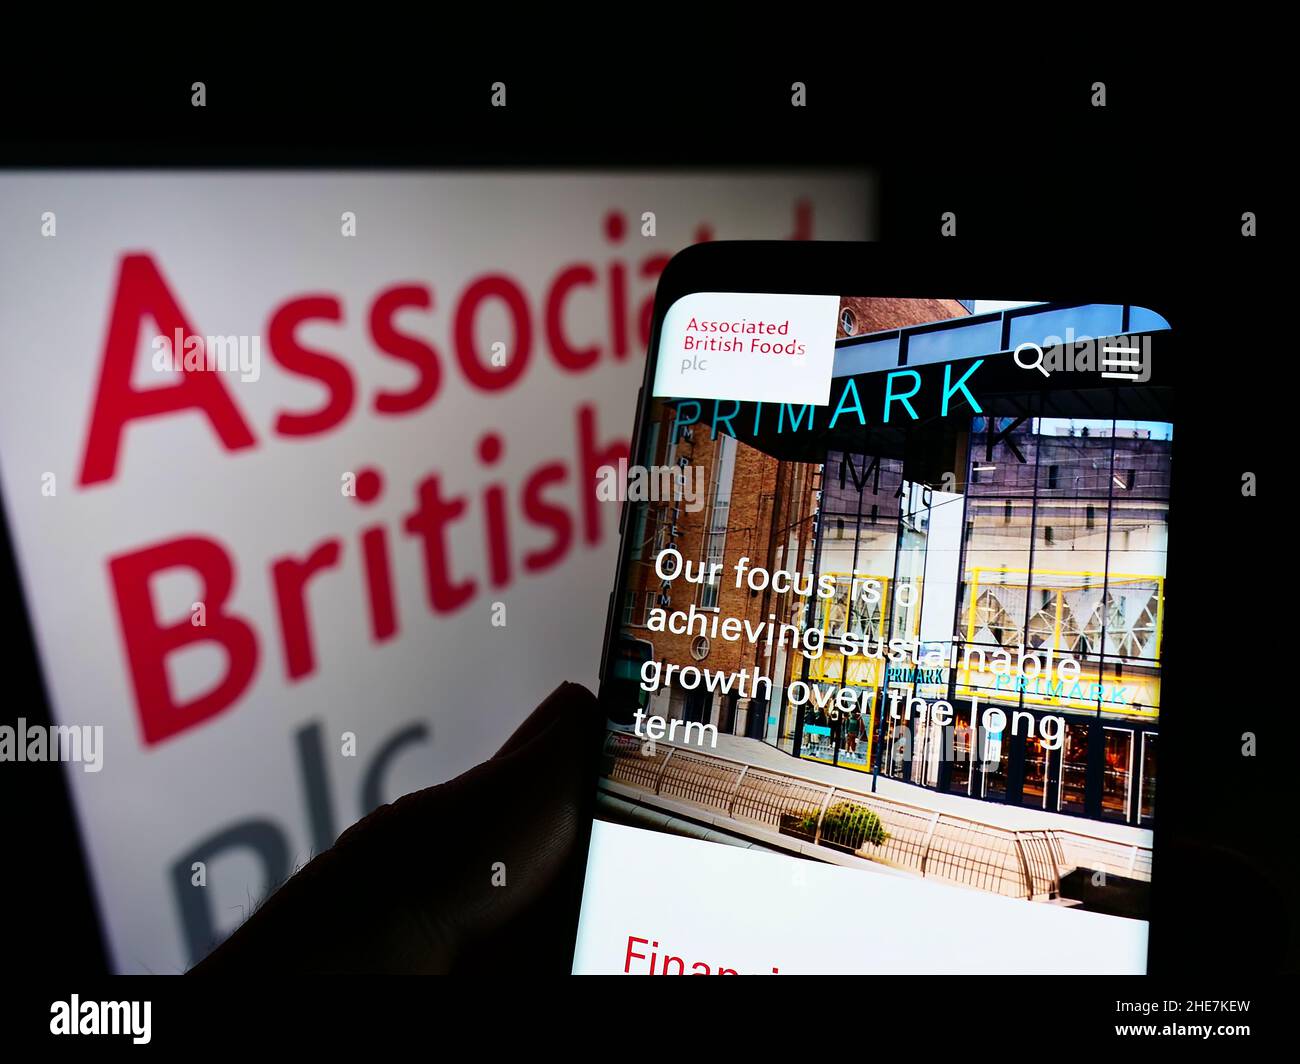 Person holding smartphone with webpage of company Associated British Foods plc (ABF) on screen in front of logo. Focus on center of phone display. Stock Photo